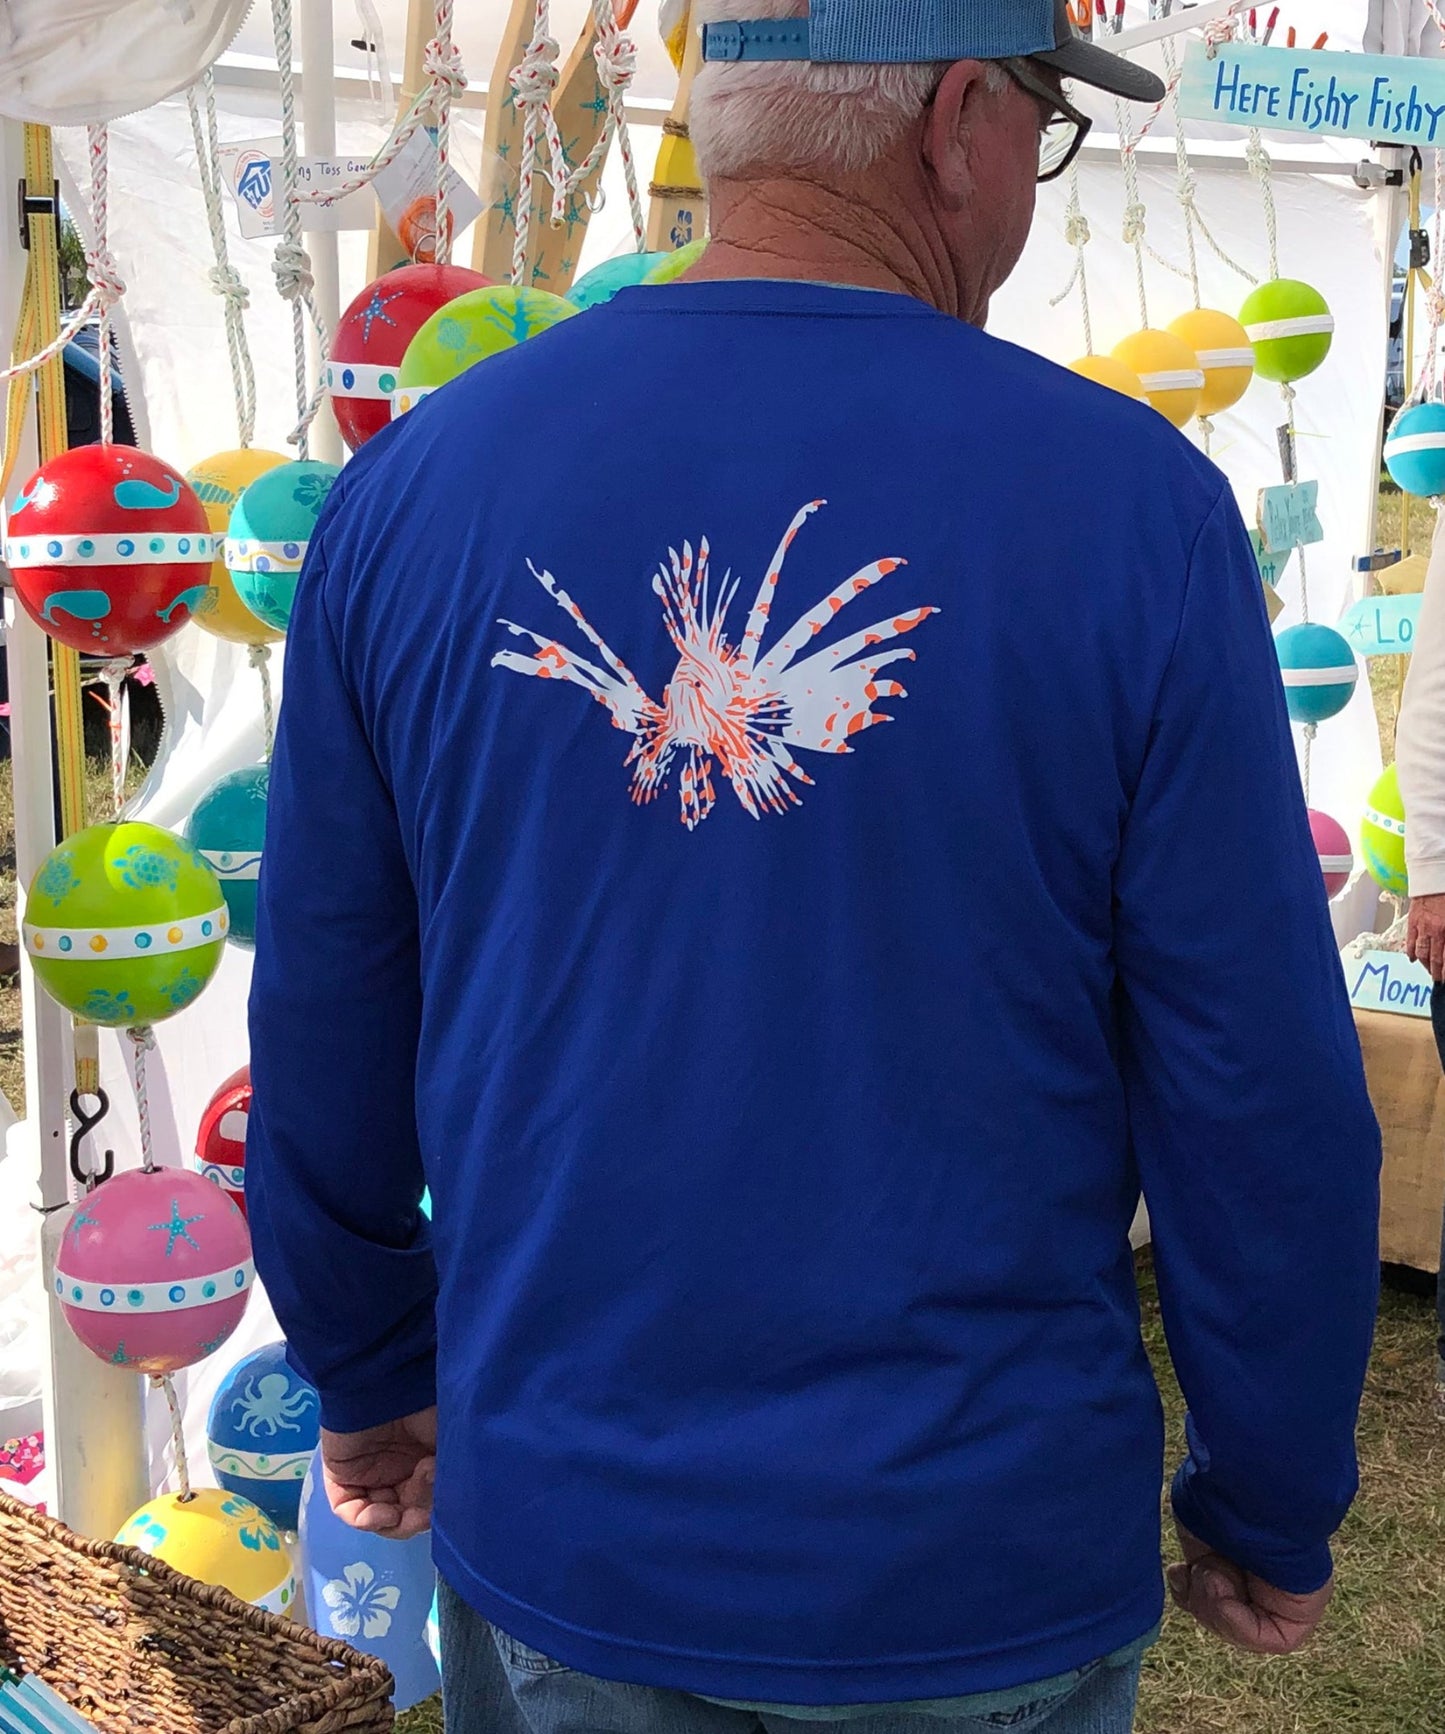 Lionfish Performance Dry-Fit Fishing Sun Protection shirts-Royal Blue